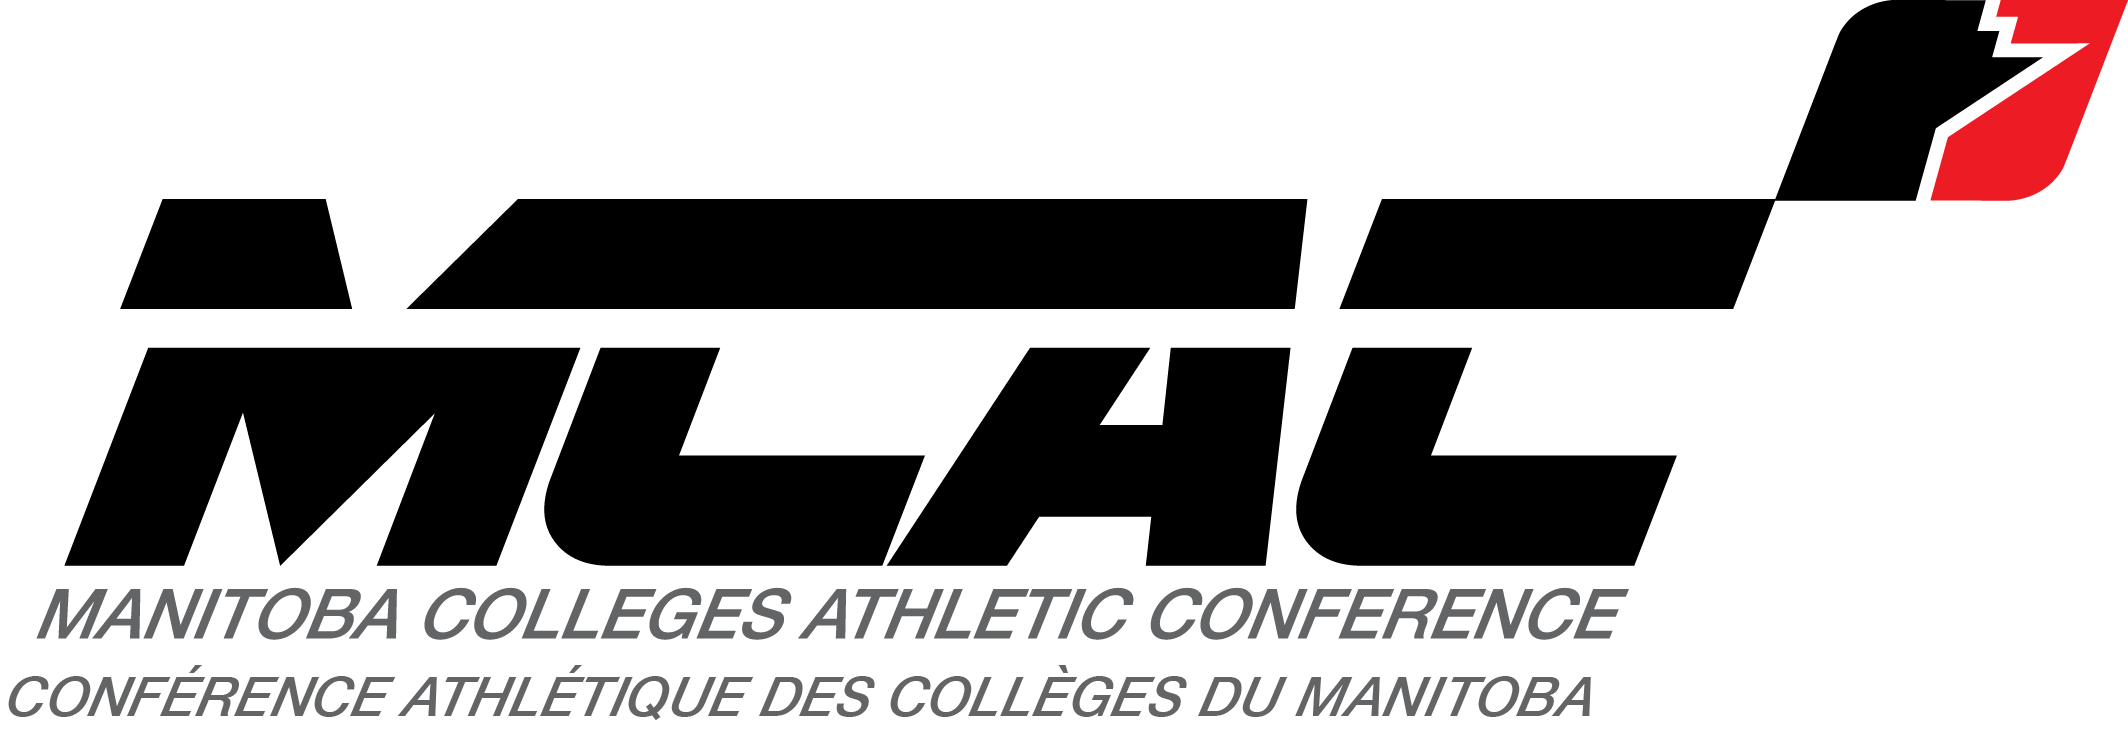 Manitoba Colleges Athletic Conference